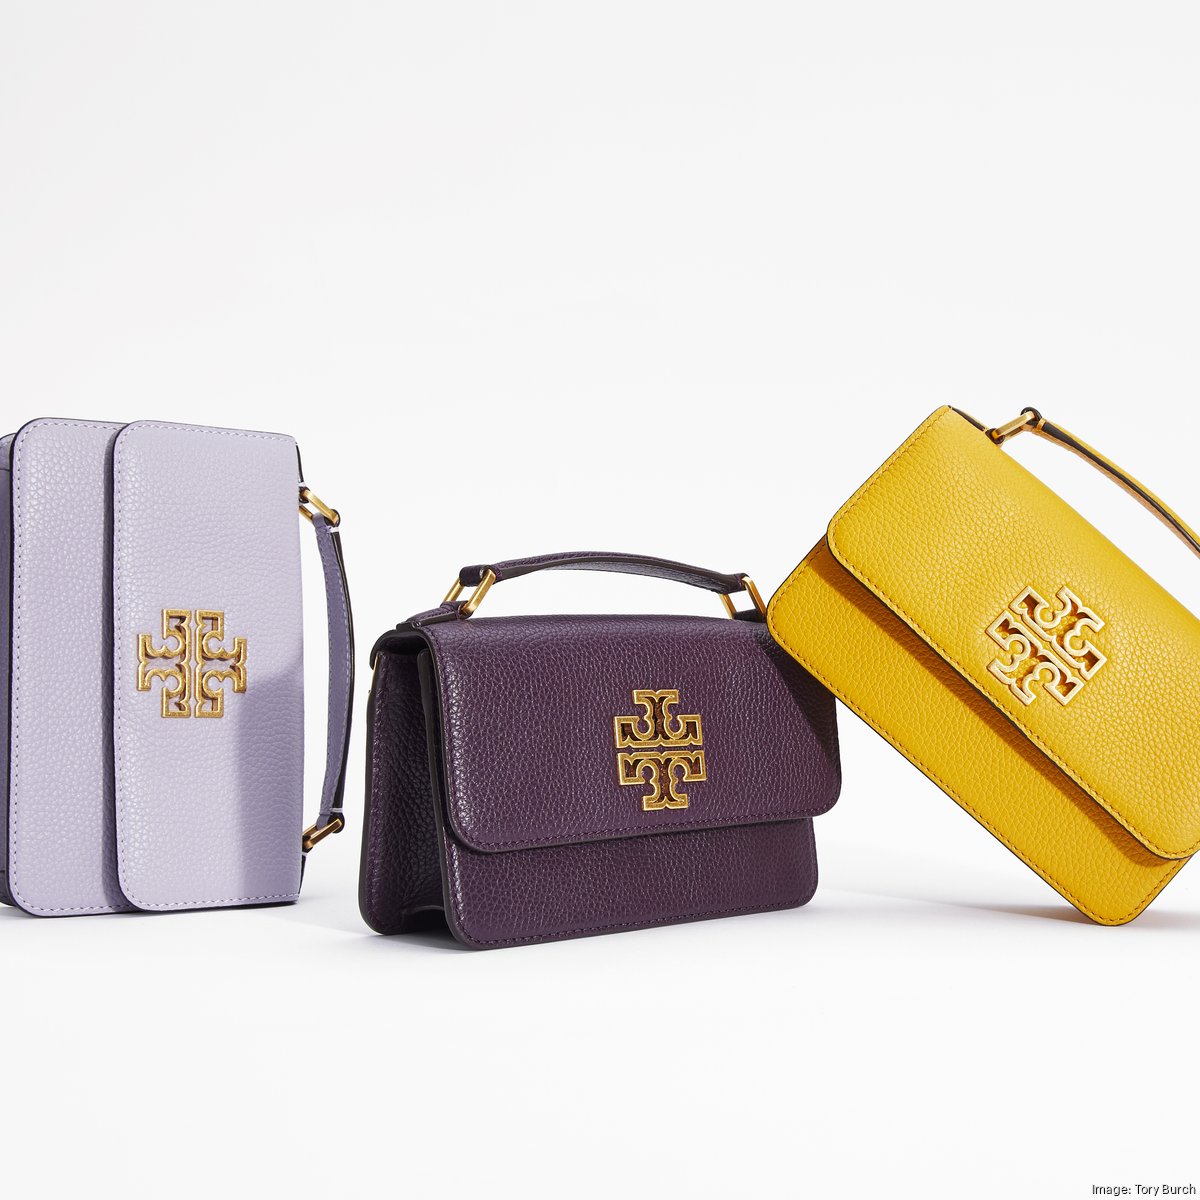 Tory Burch Outlet is filled - Legends Outlets Kansas City